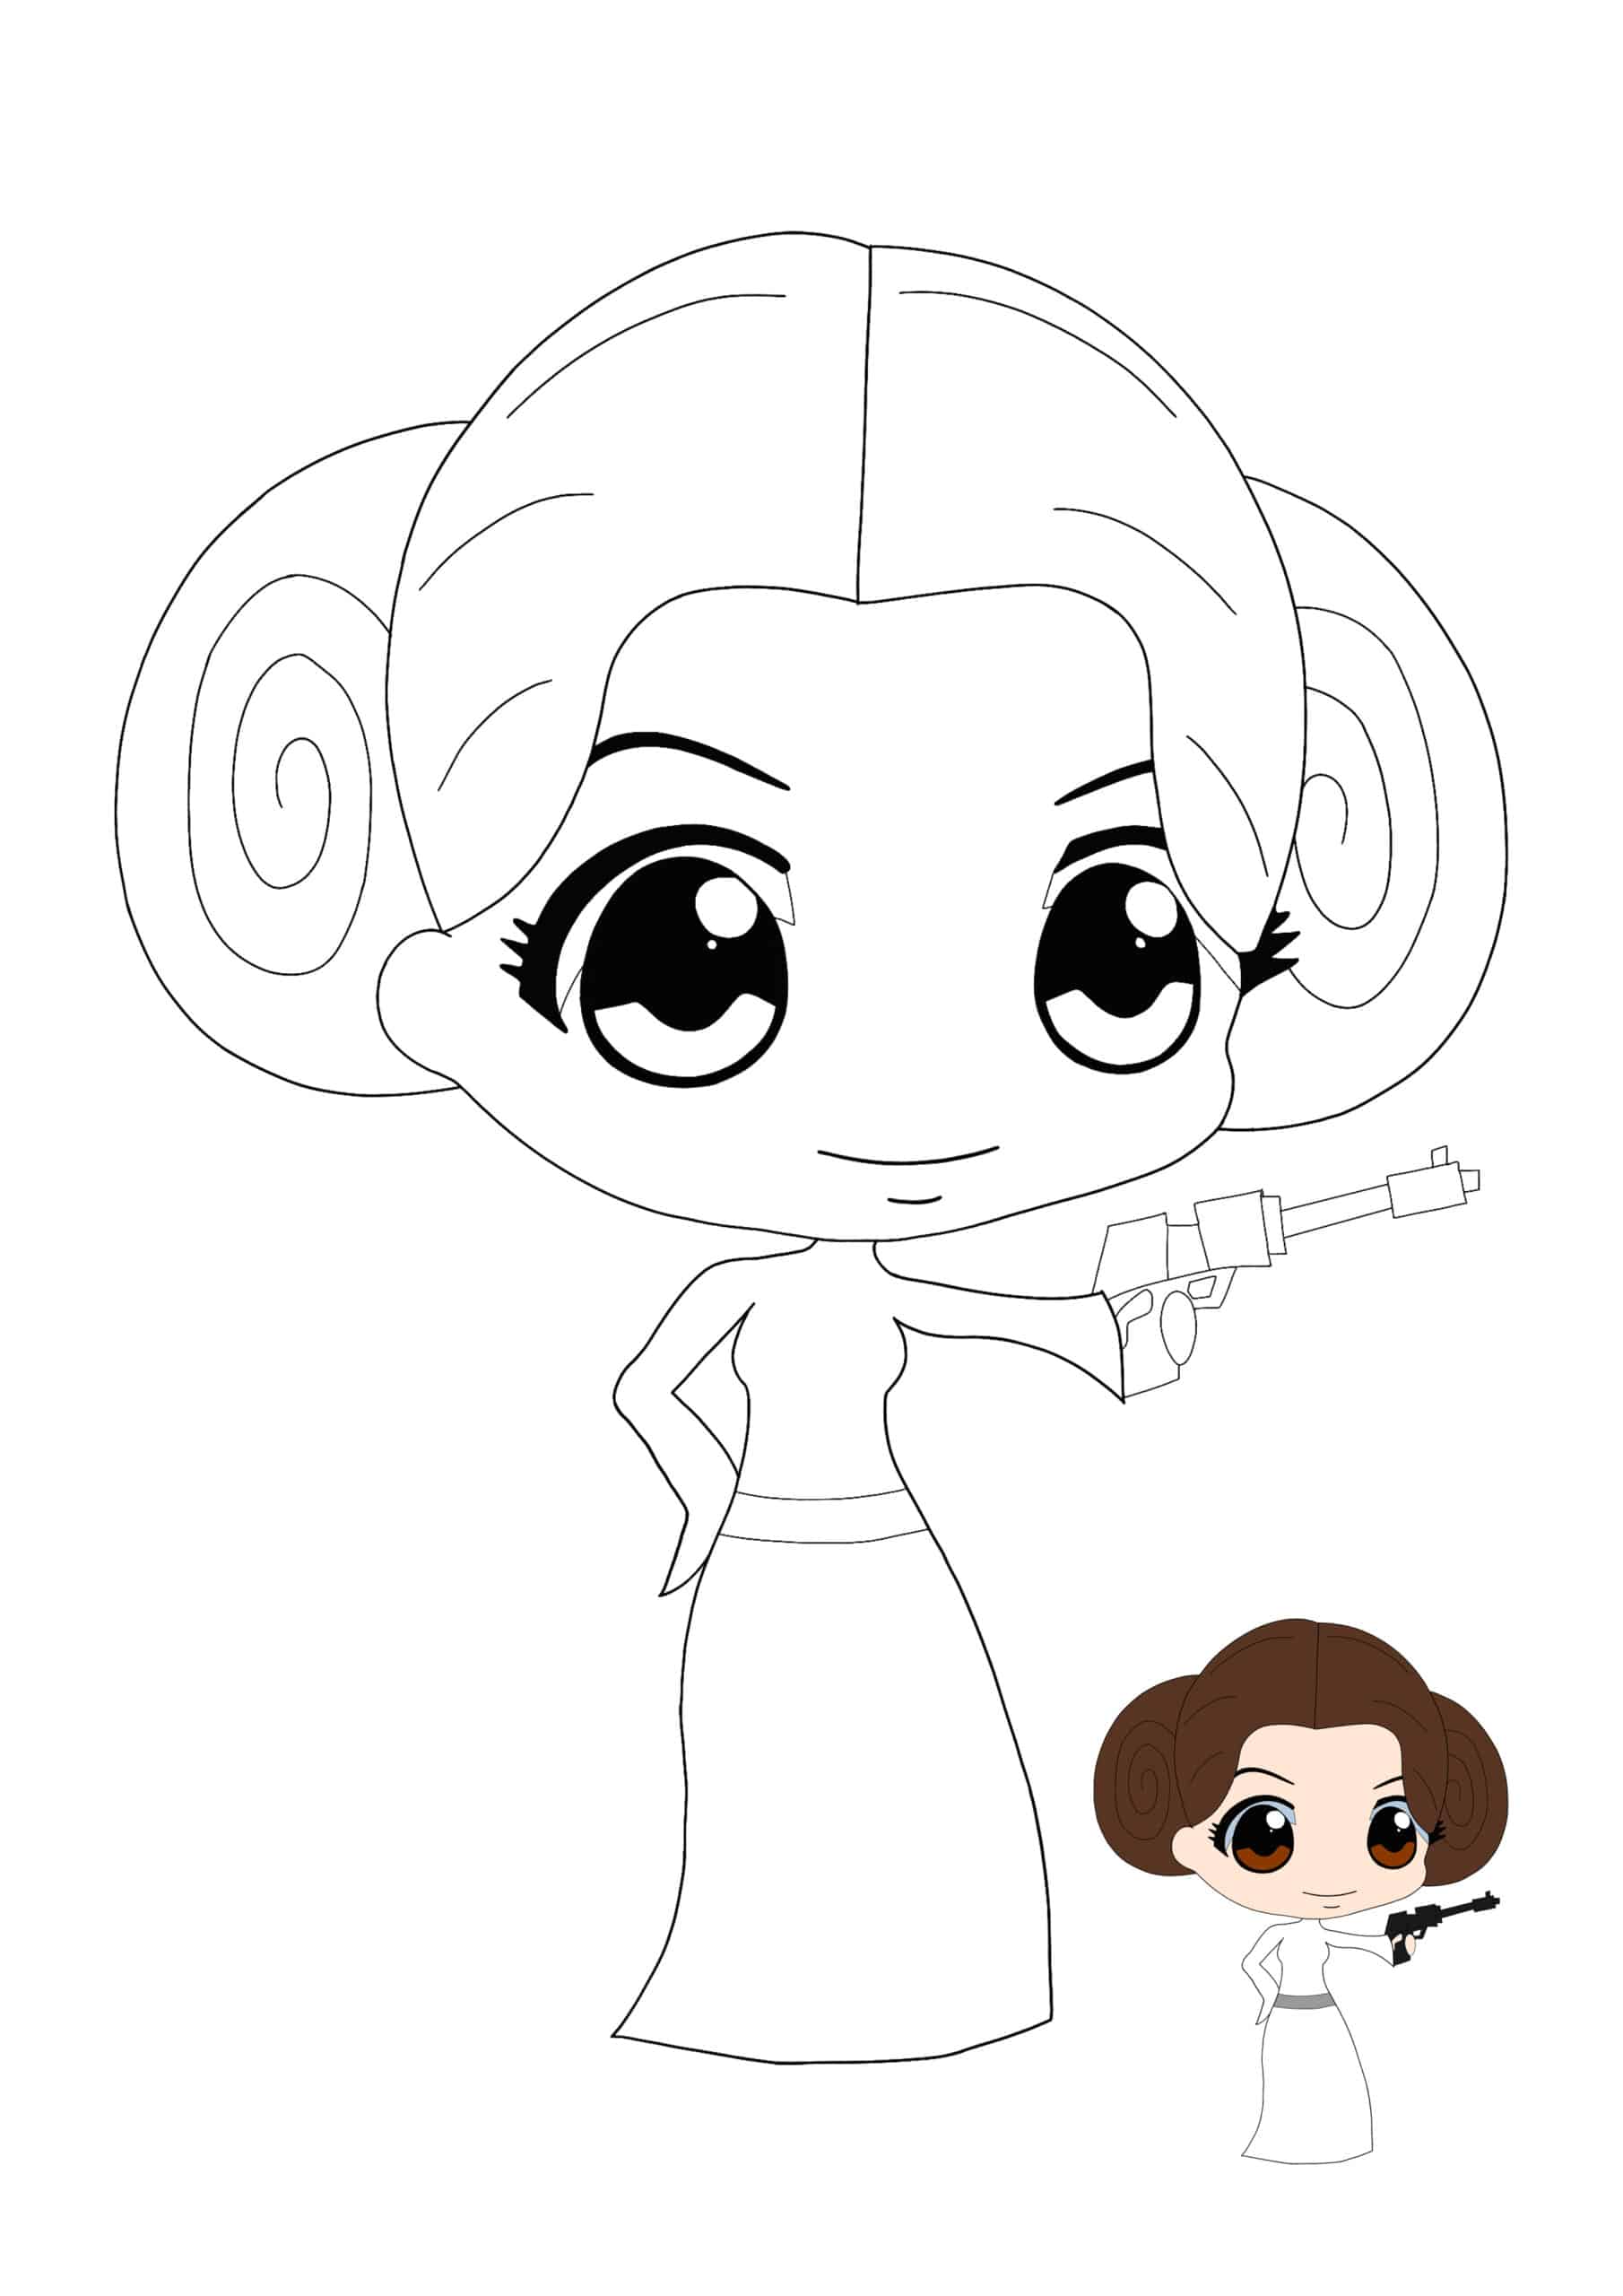 Princess Leia Coloring Pages   Coloring Cool